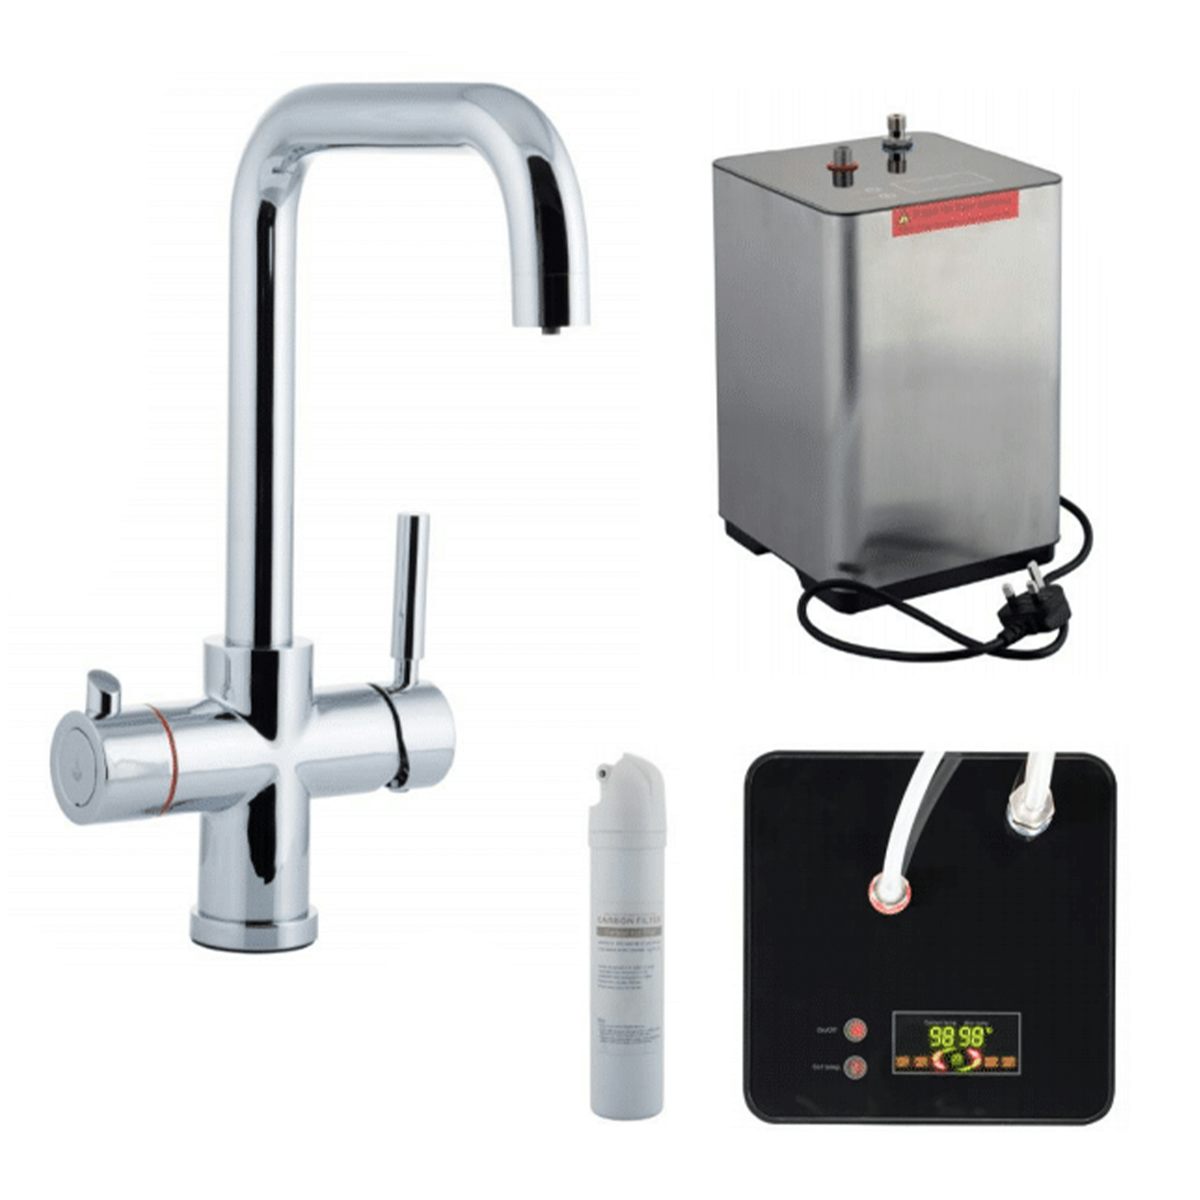 Schon 3 in 1 boiling water kitchen tap